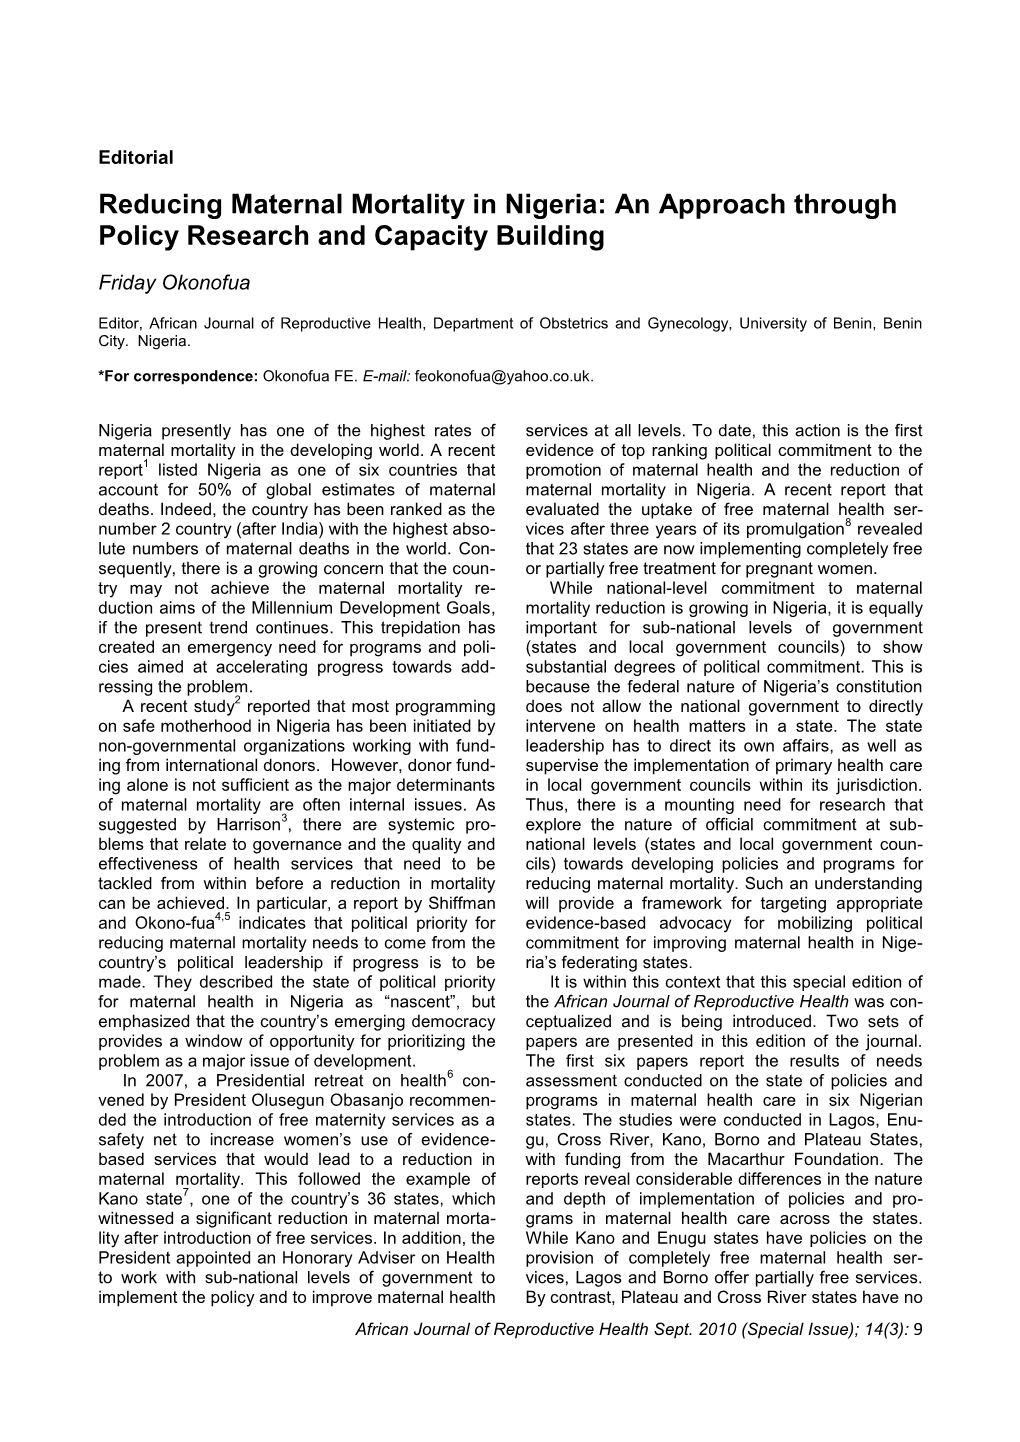 Reducing Maternal Mortality in Nigeria: an Approach Through Policy Research and Capacity Building